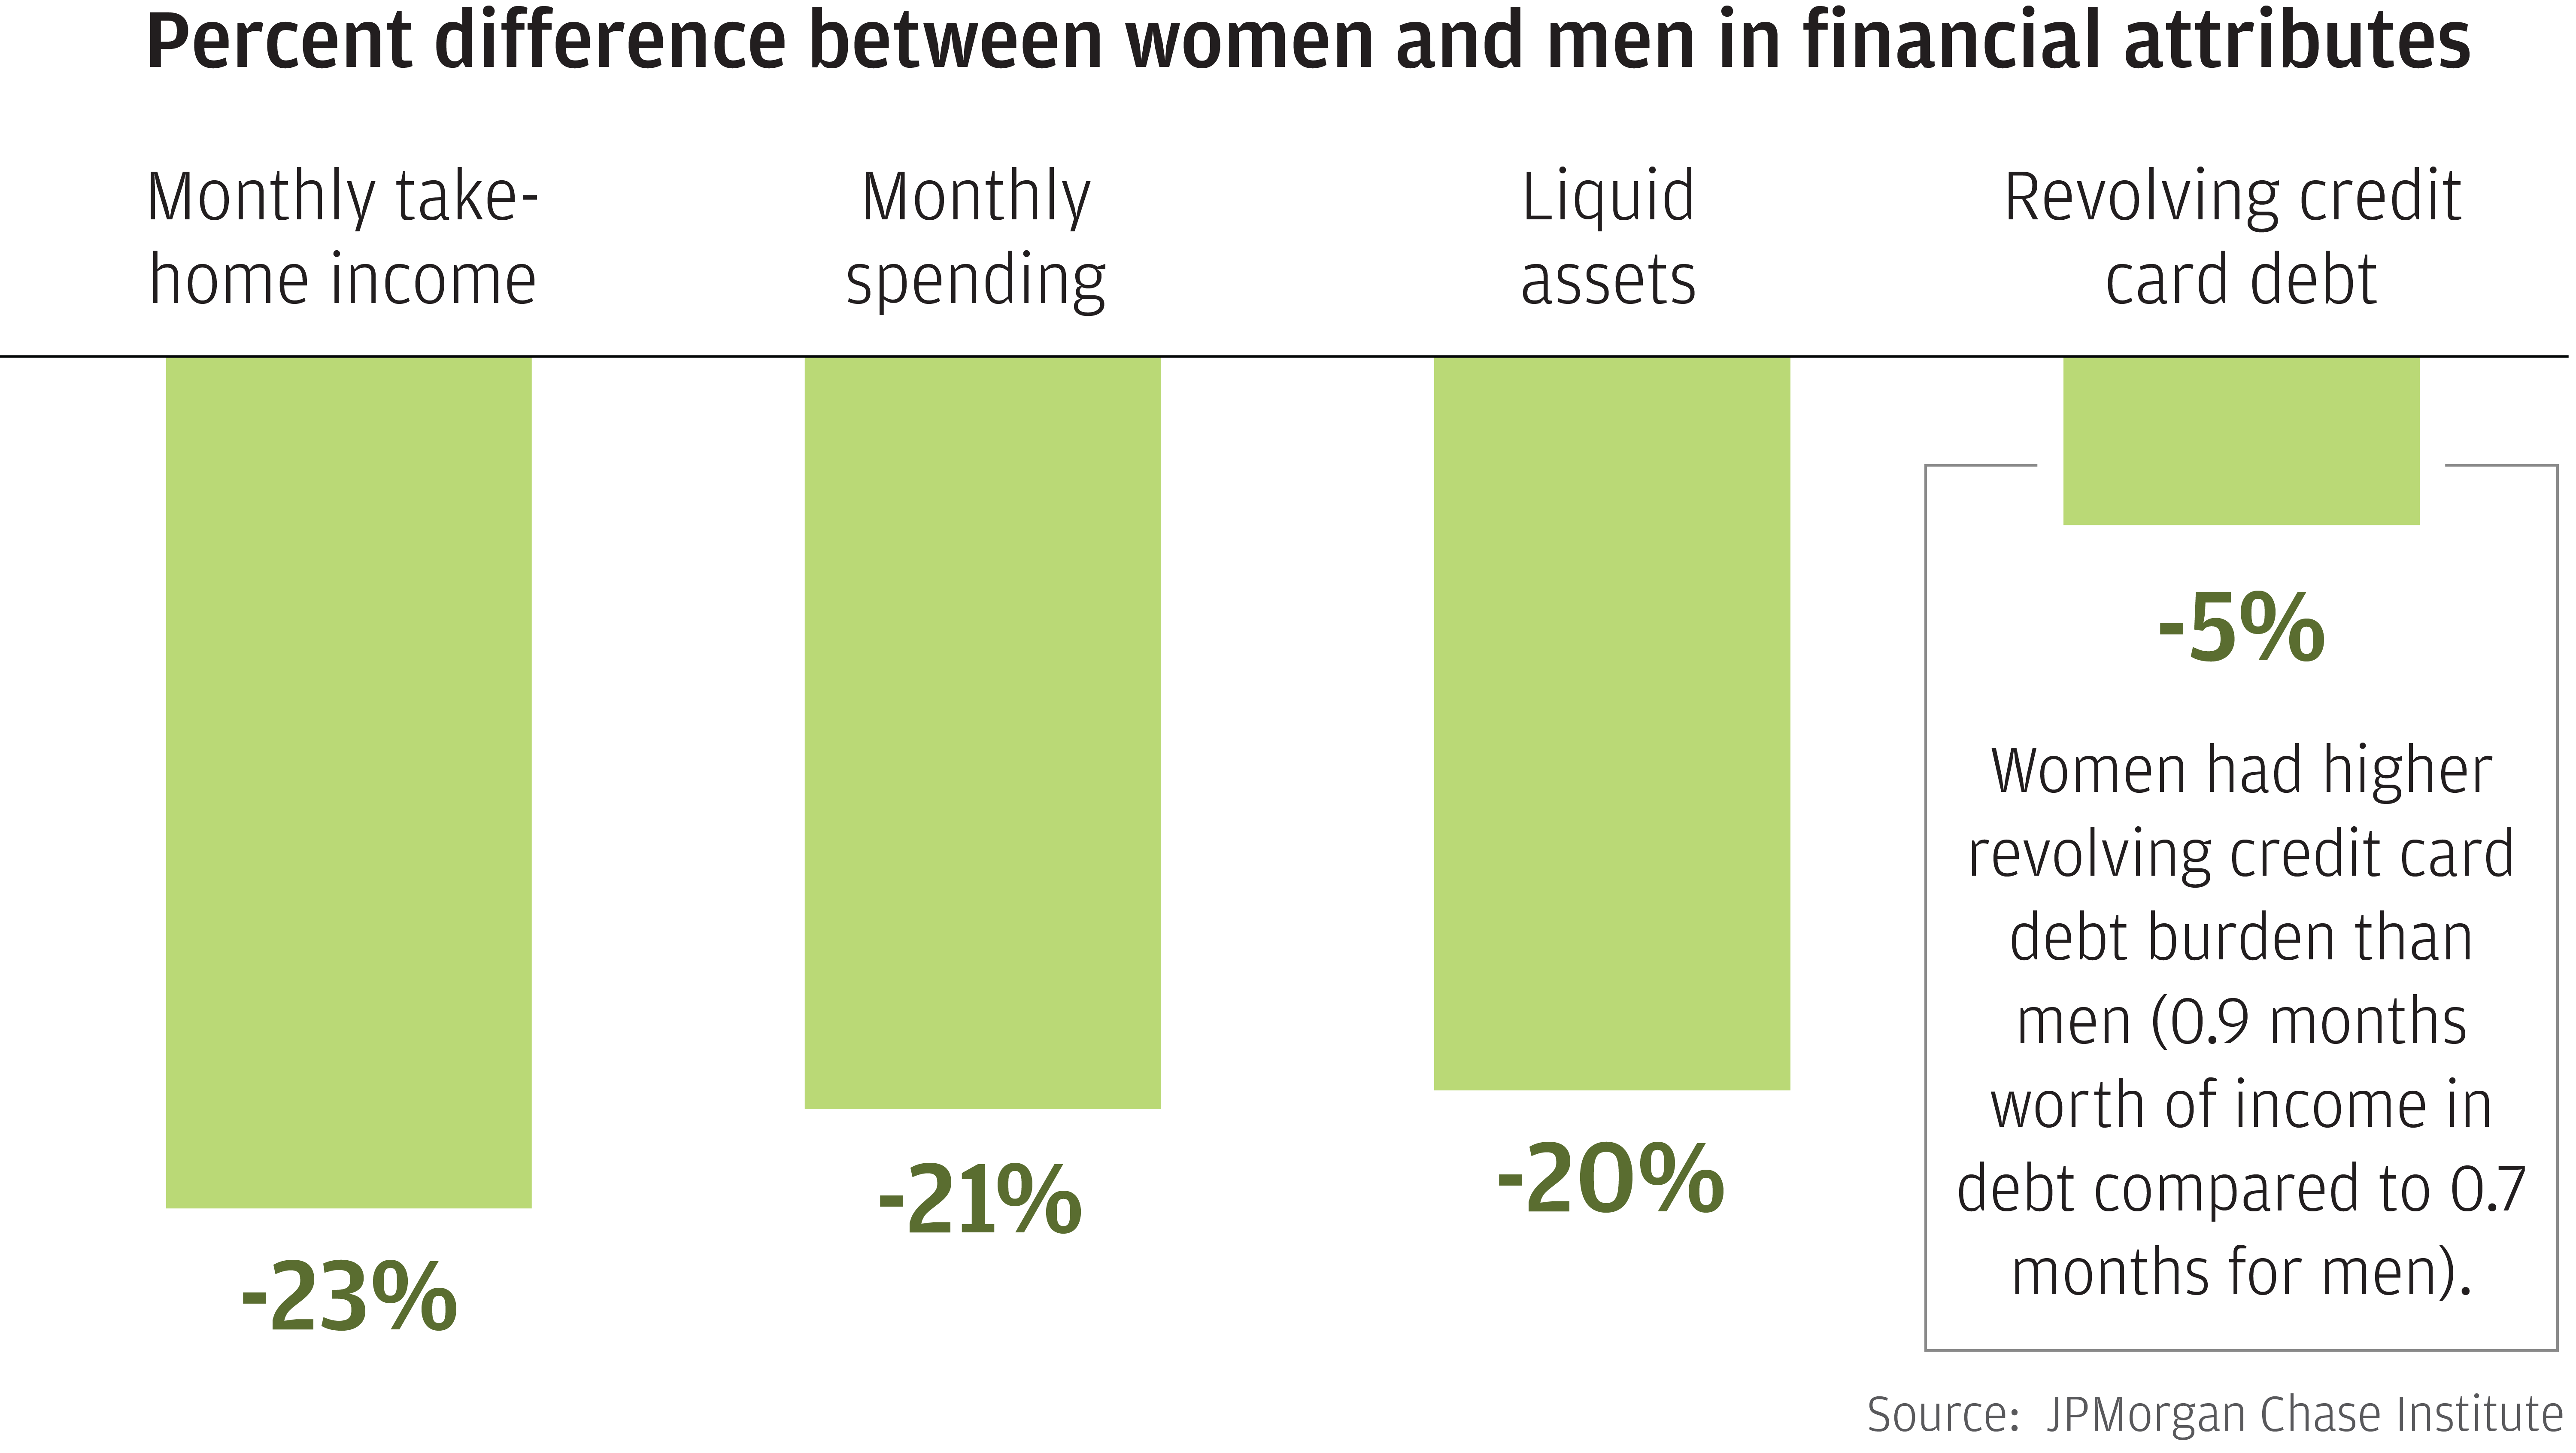 Bar graph describes how female account holders had lower income, spending, and liquid assets and higher revolving credit card debt burden than male account holders